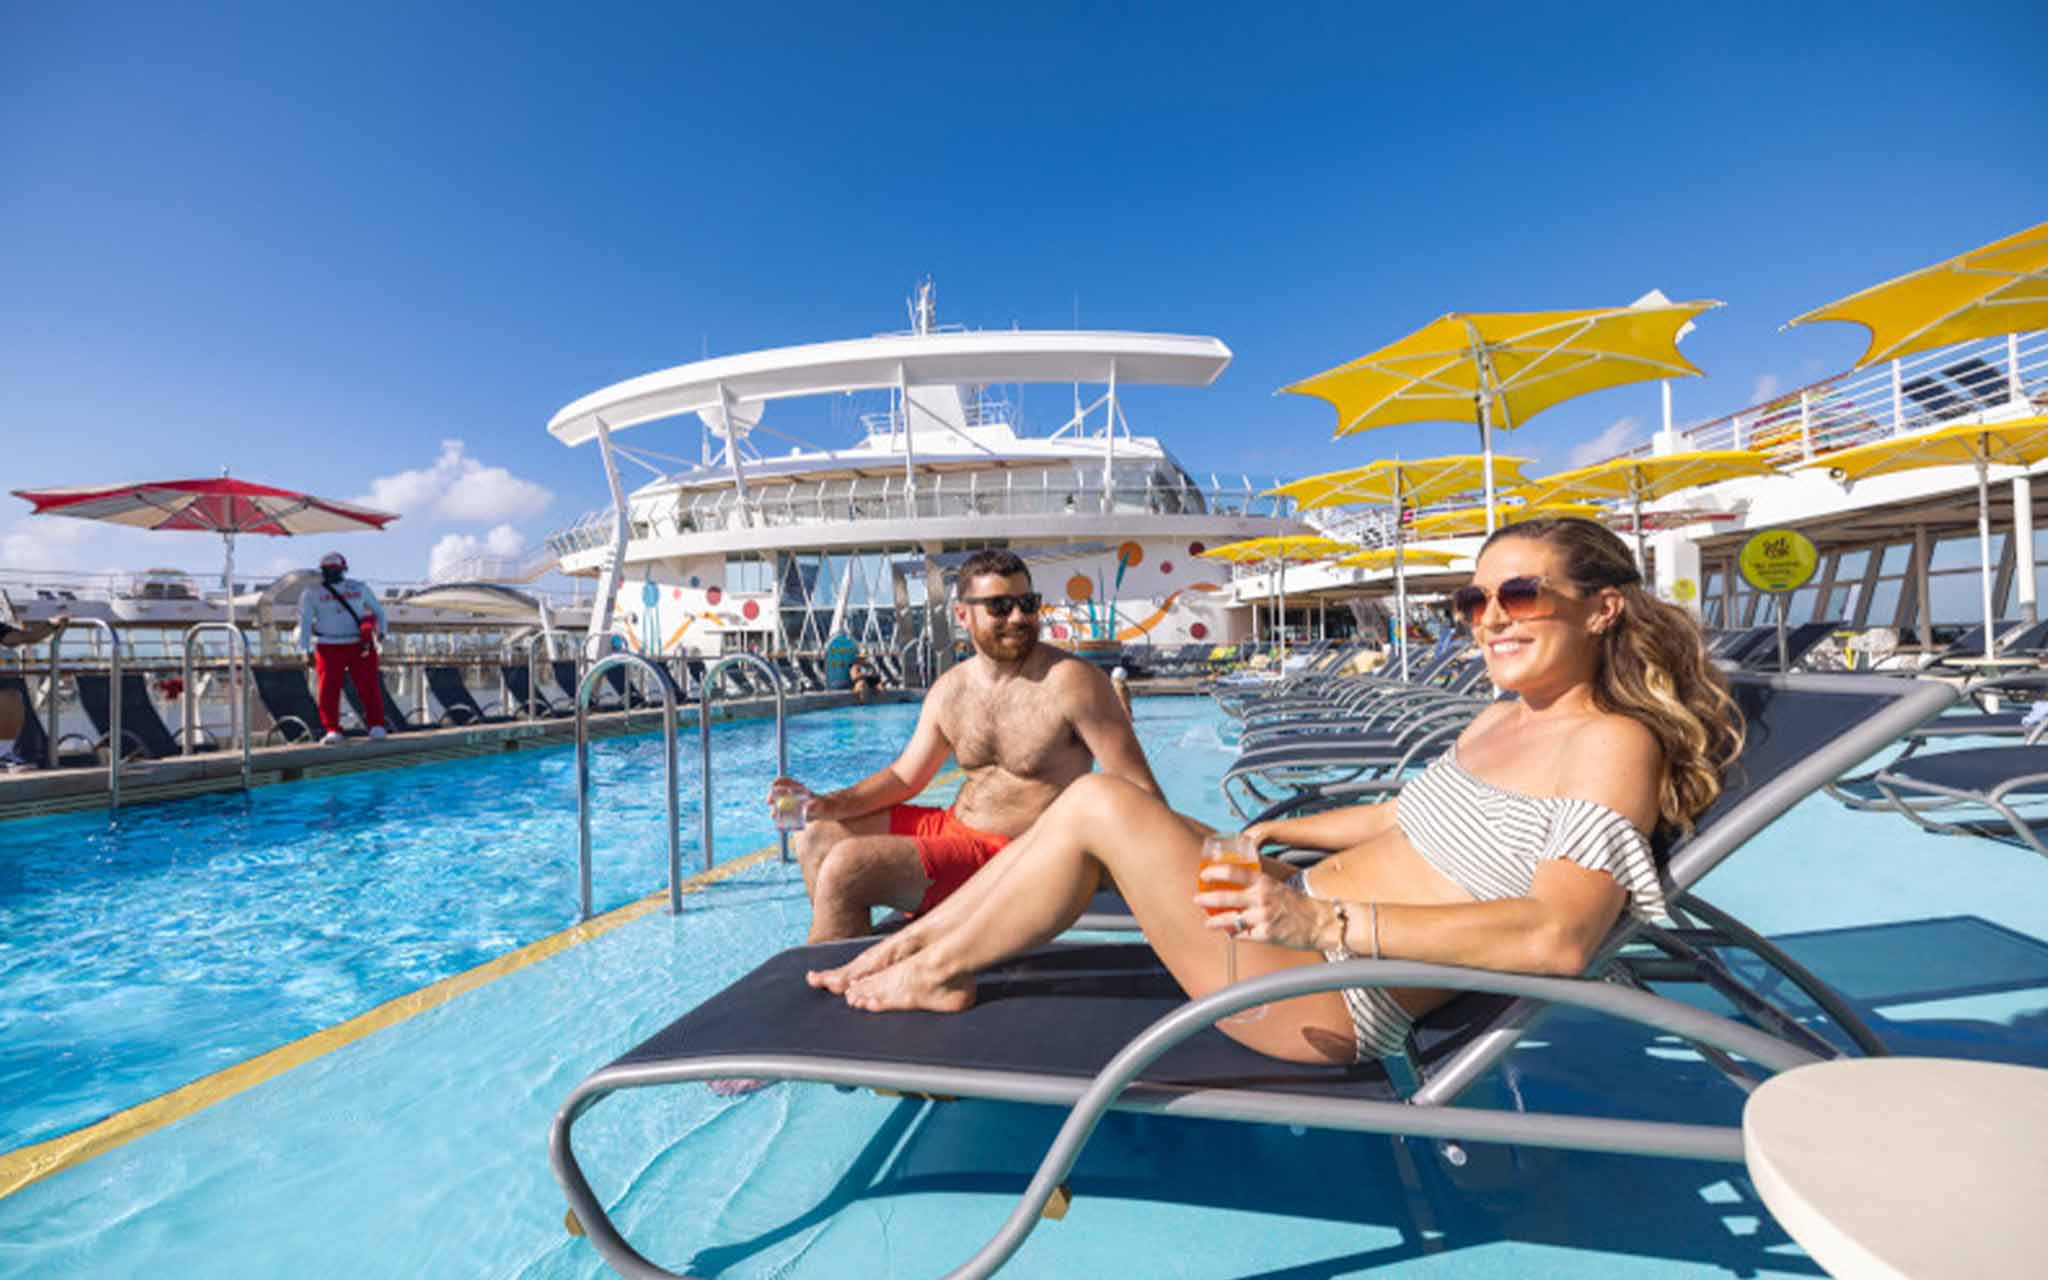 30% Off Every Guest & Kids Sail Free with Royal Caribbean